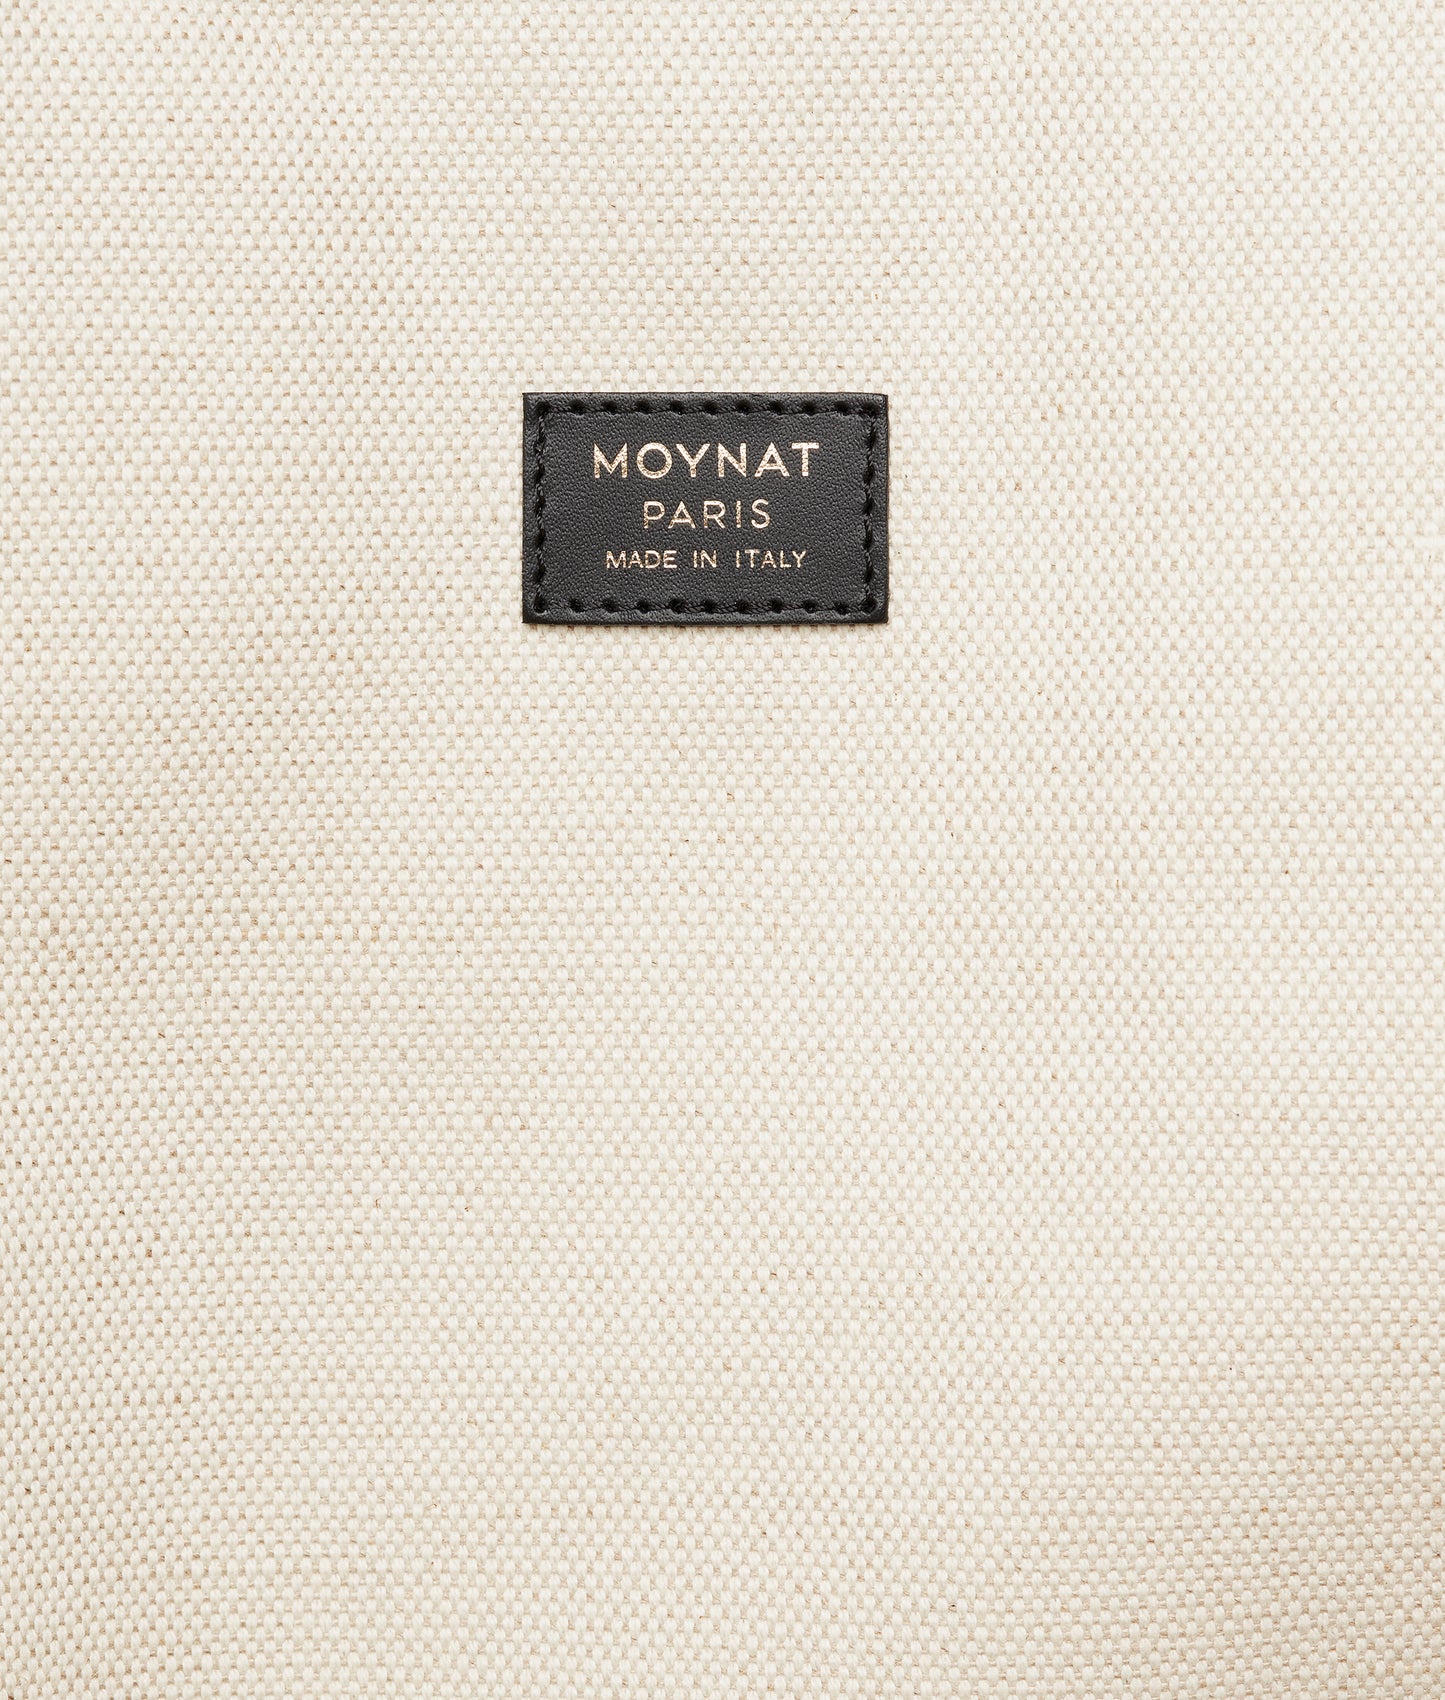 Moynat Canvas 1920 Oh Tote - BAGAHOLICBOY